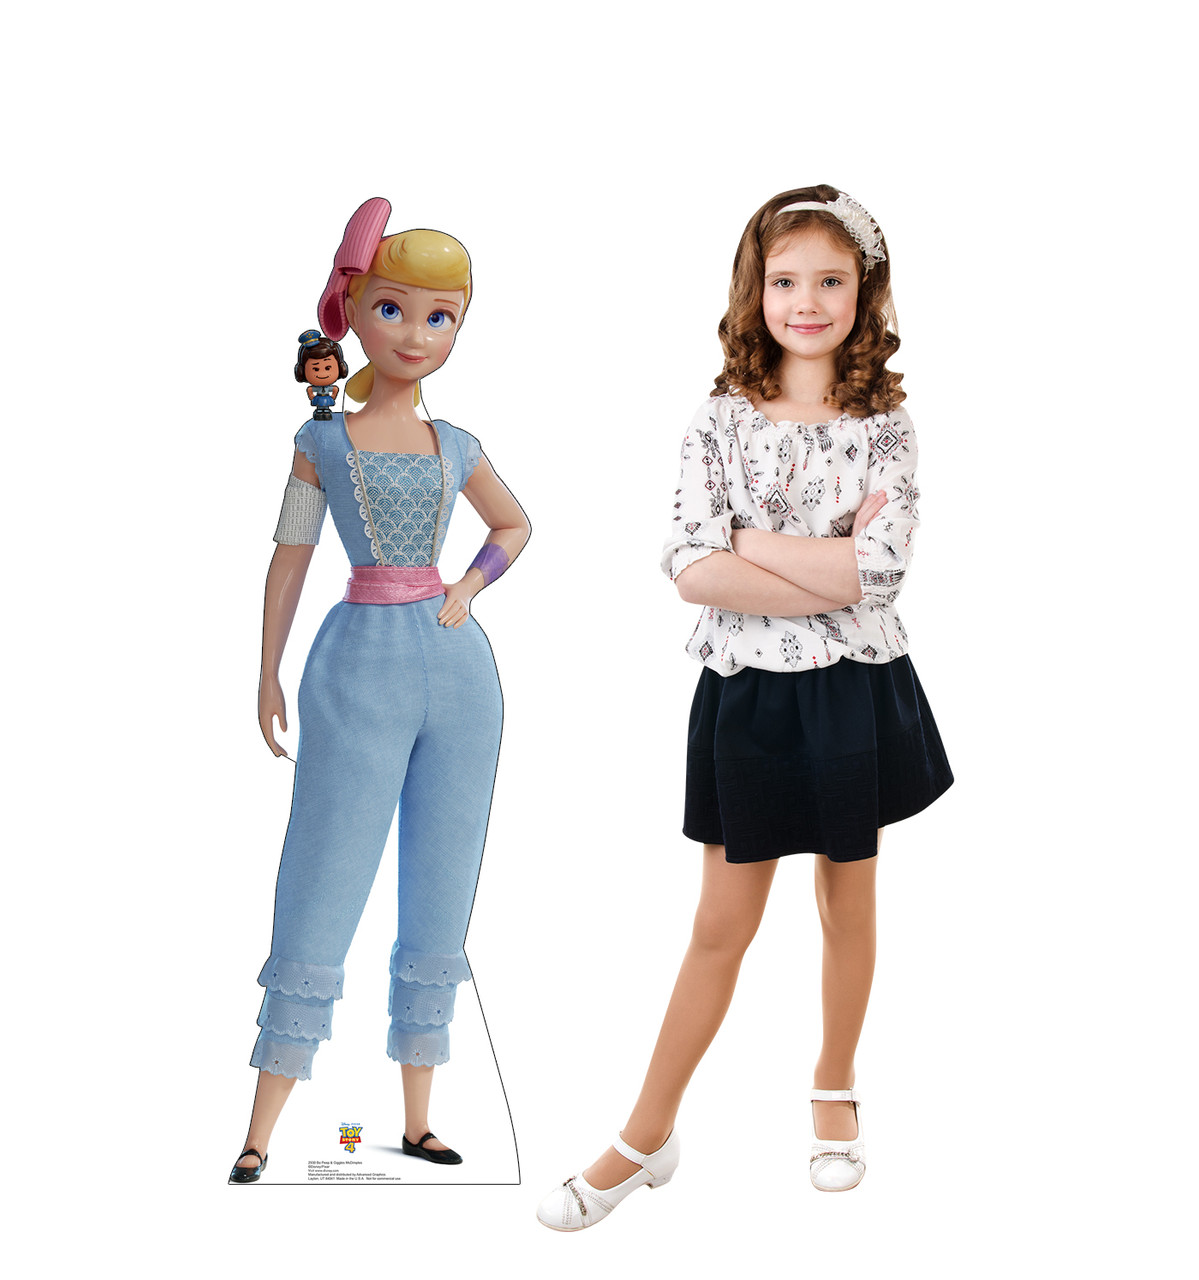  Bo Peep & Officer Giggles McDimples - Toy Story 4 Cardboard Cutout Lifesize